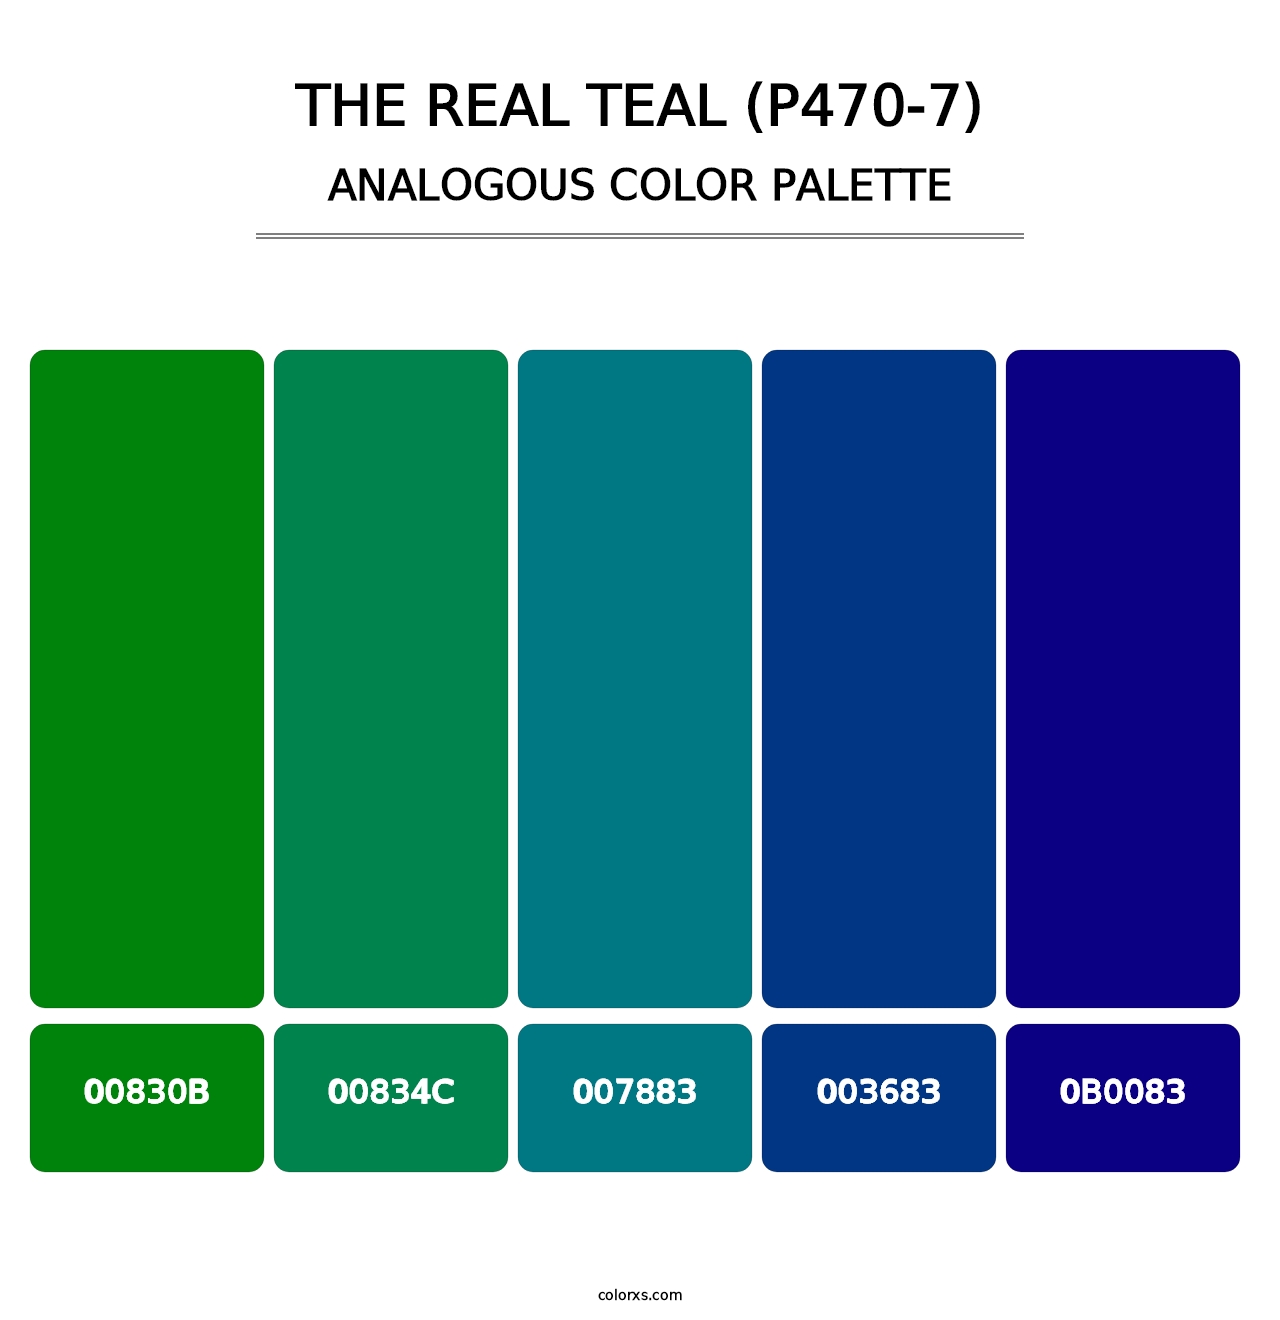 The Real Teal (P470-7) - Analogous Color Palette